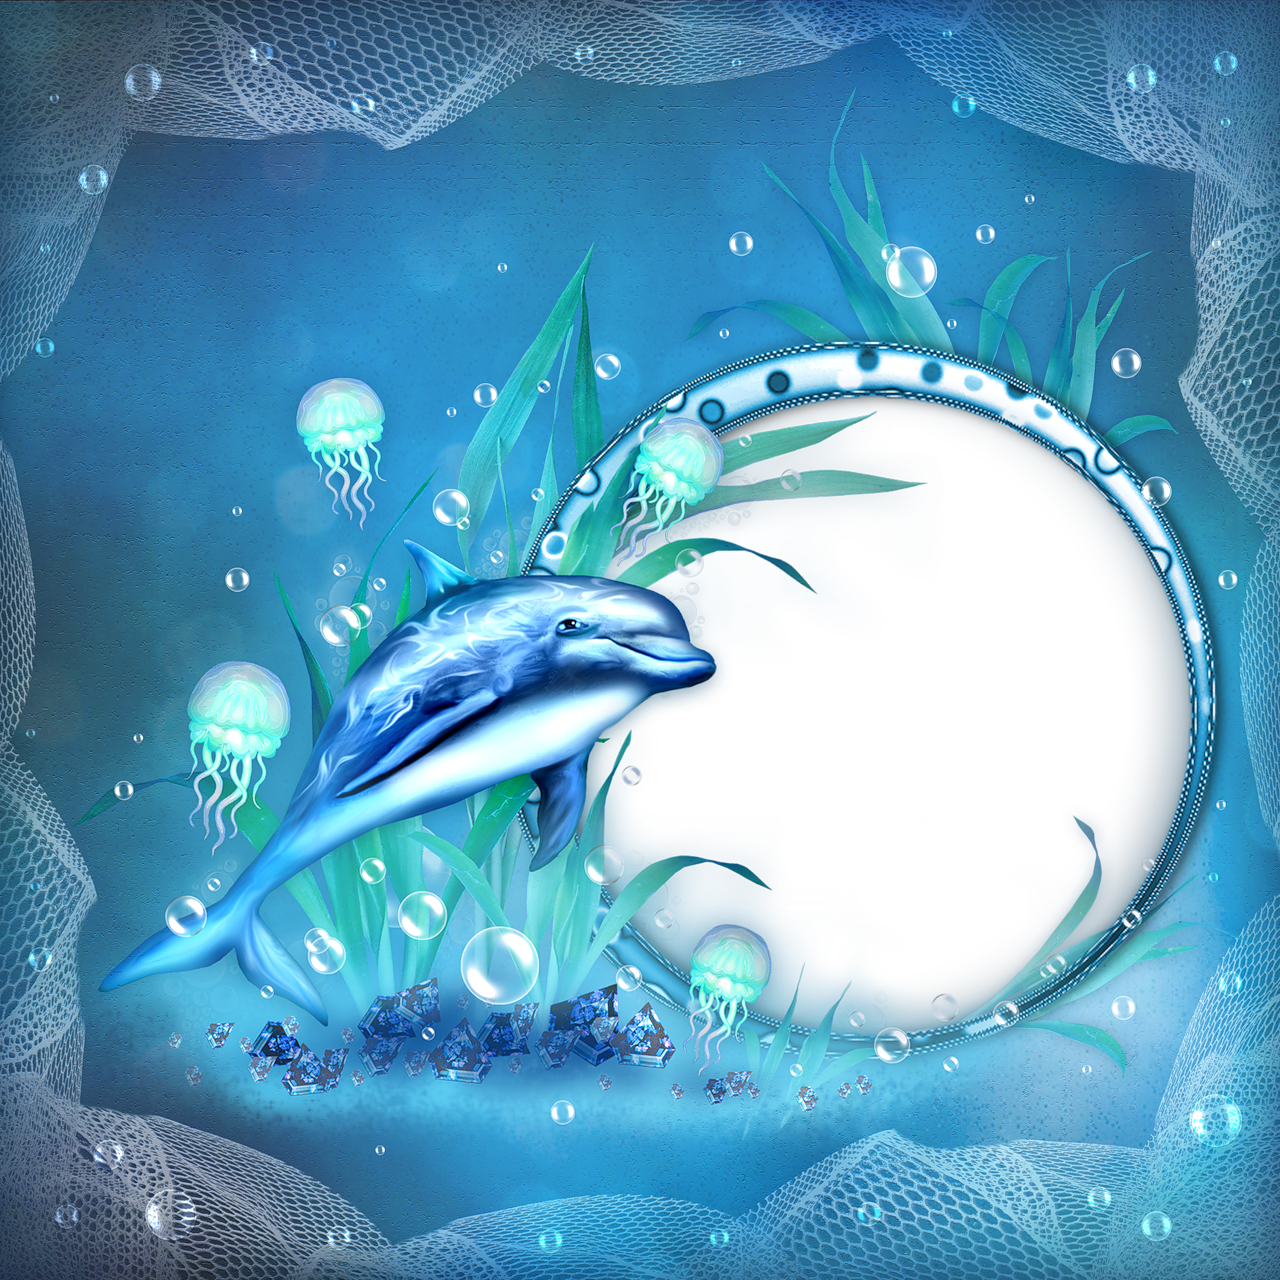 dolphins clipart water